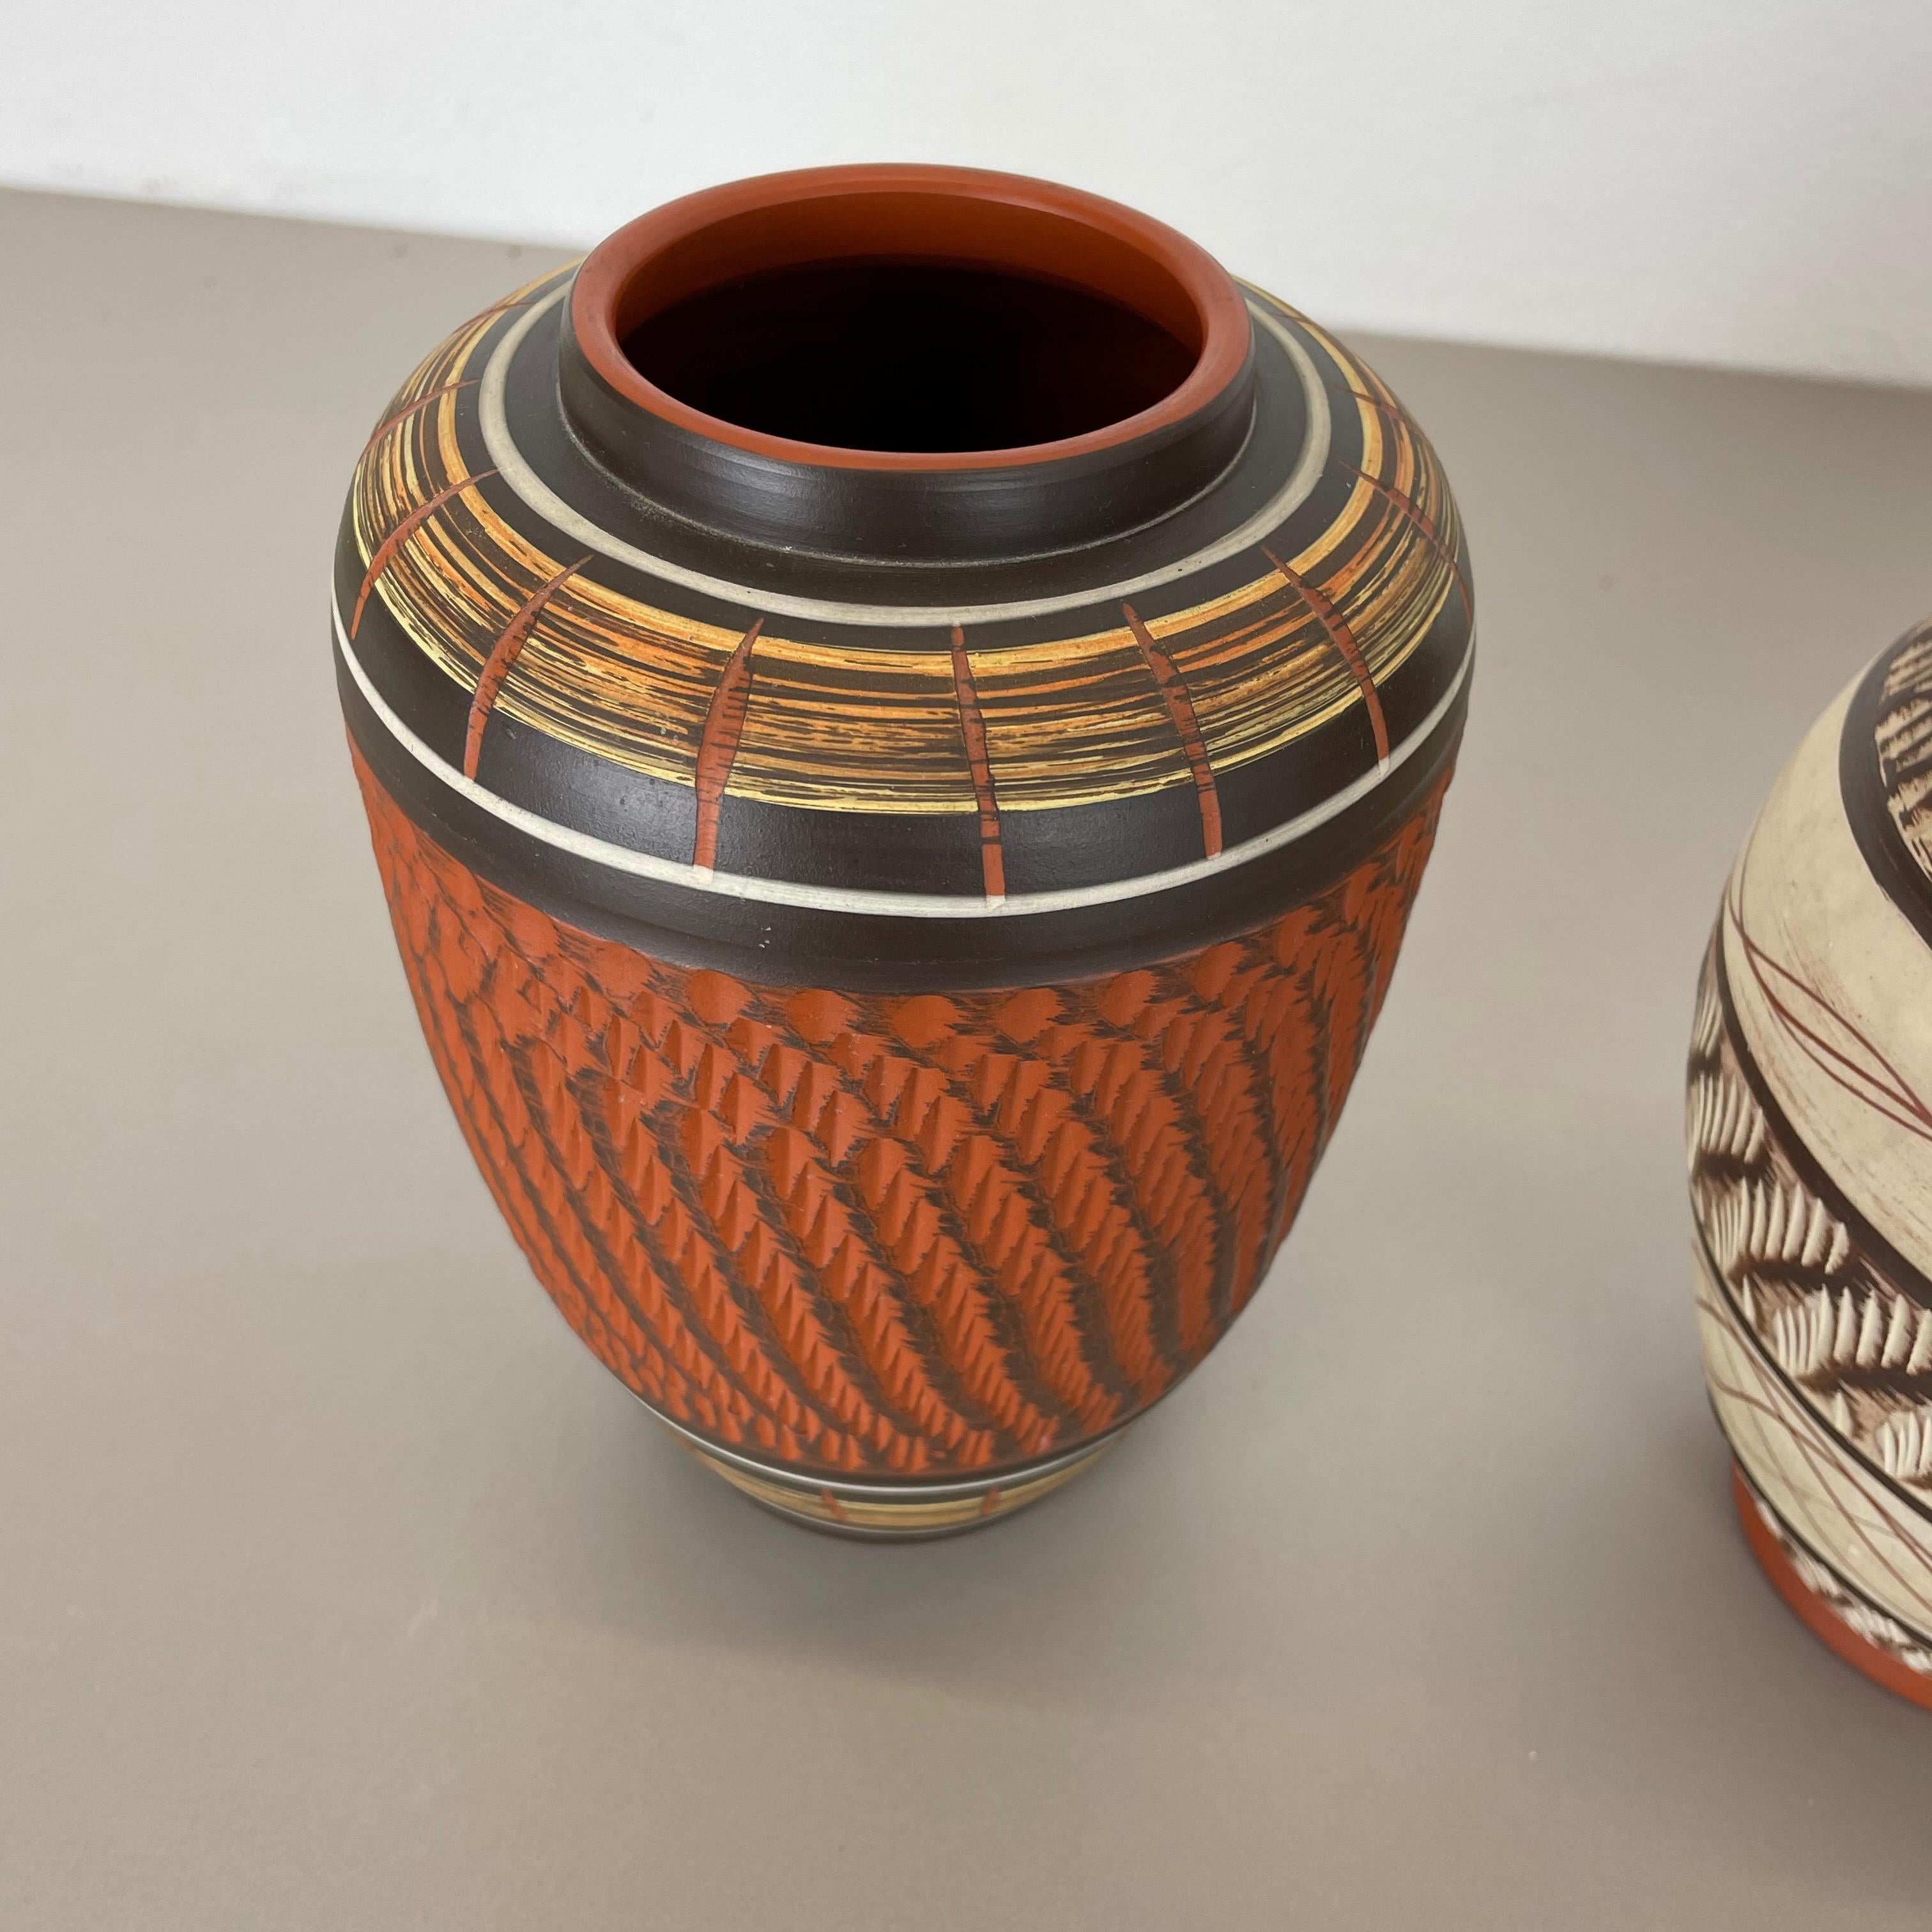 Set of 3 Abstract Ceramic Pottery Vases by EIWA / AKRU Ceramics, Germany, 1950s For Sale 2